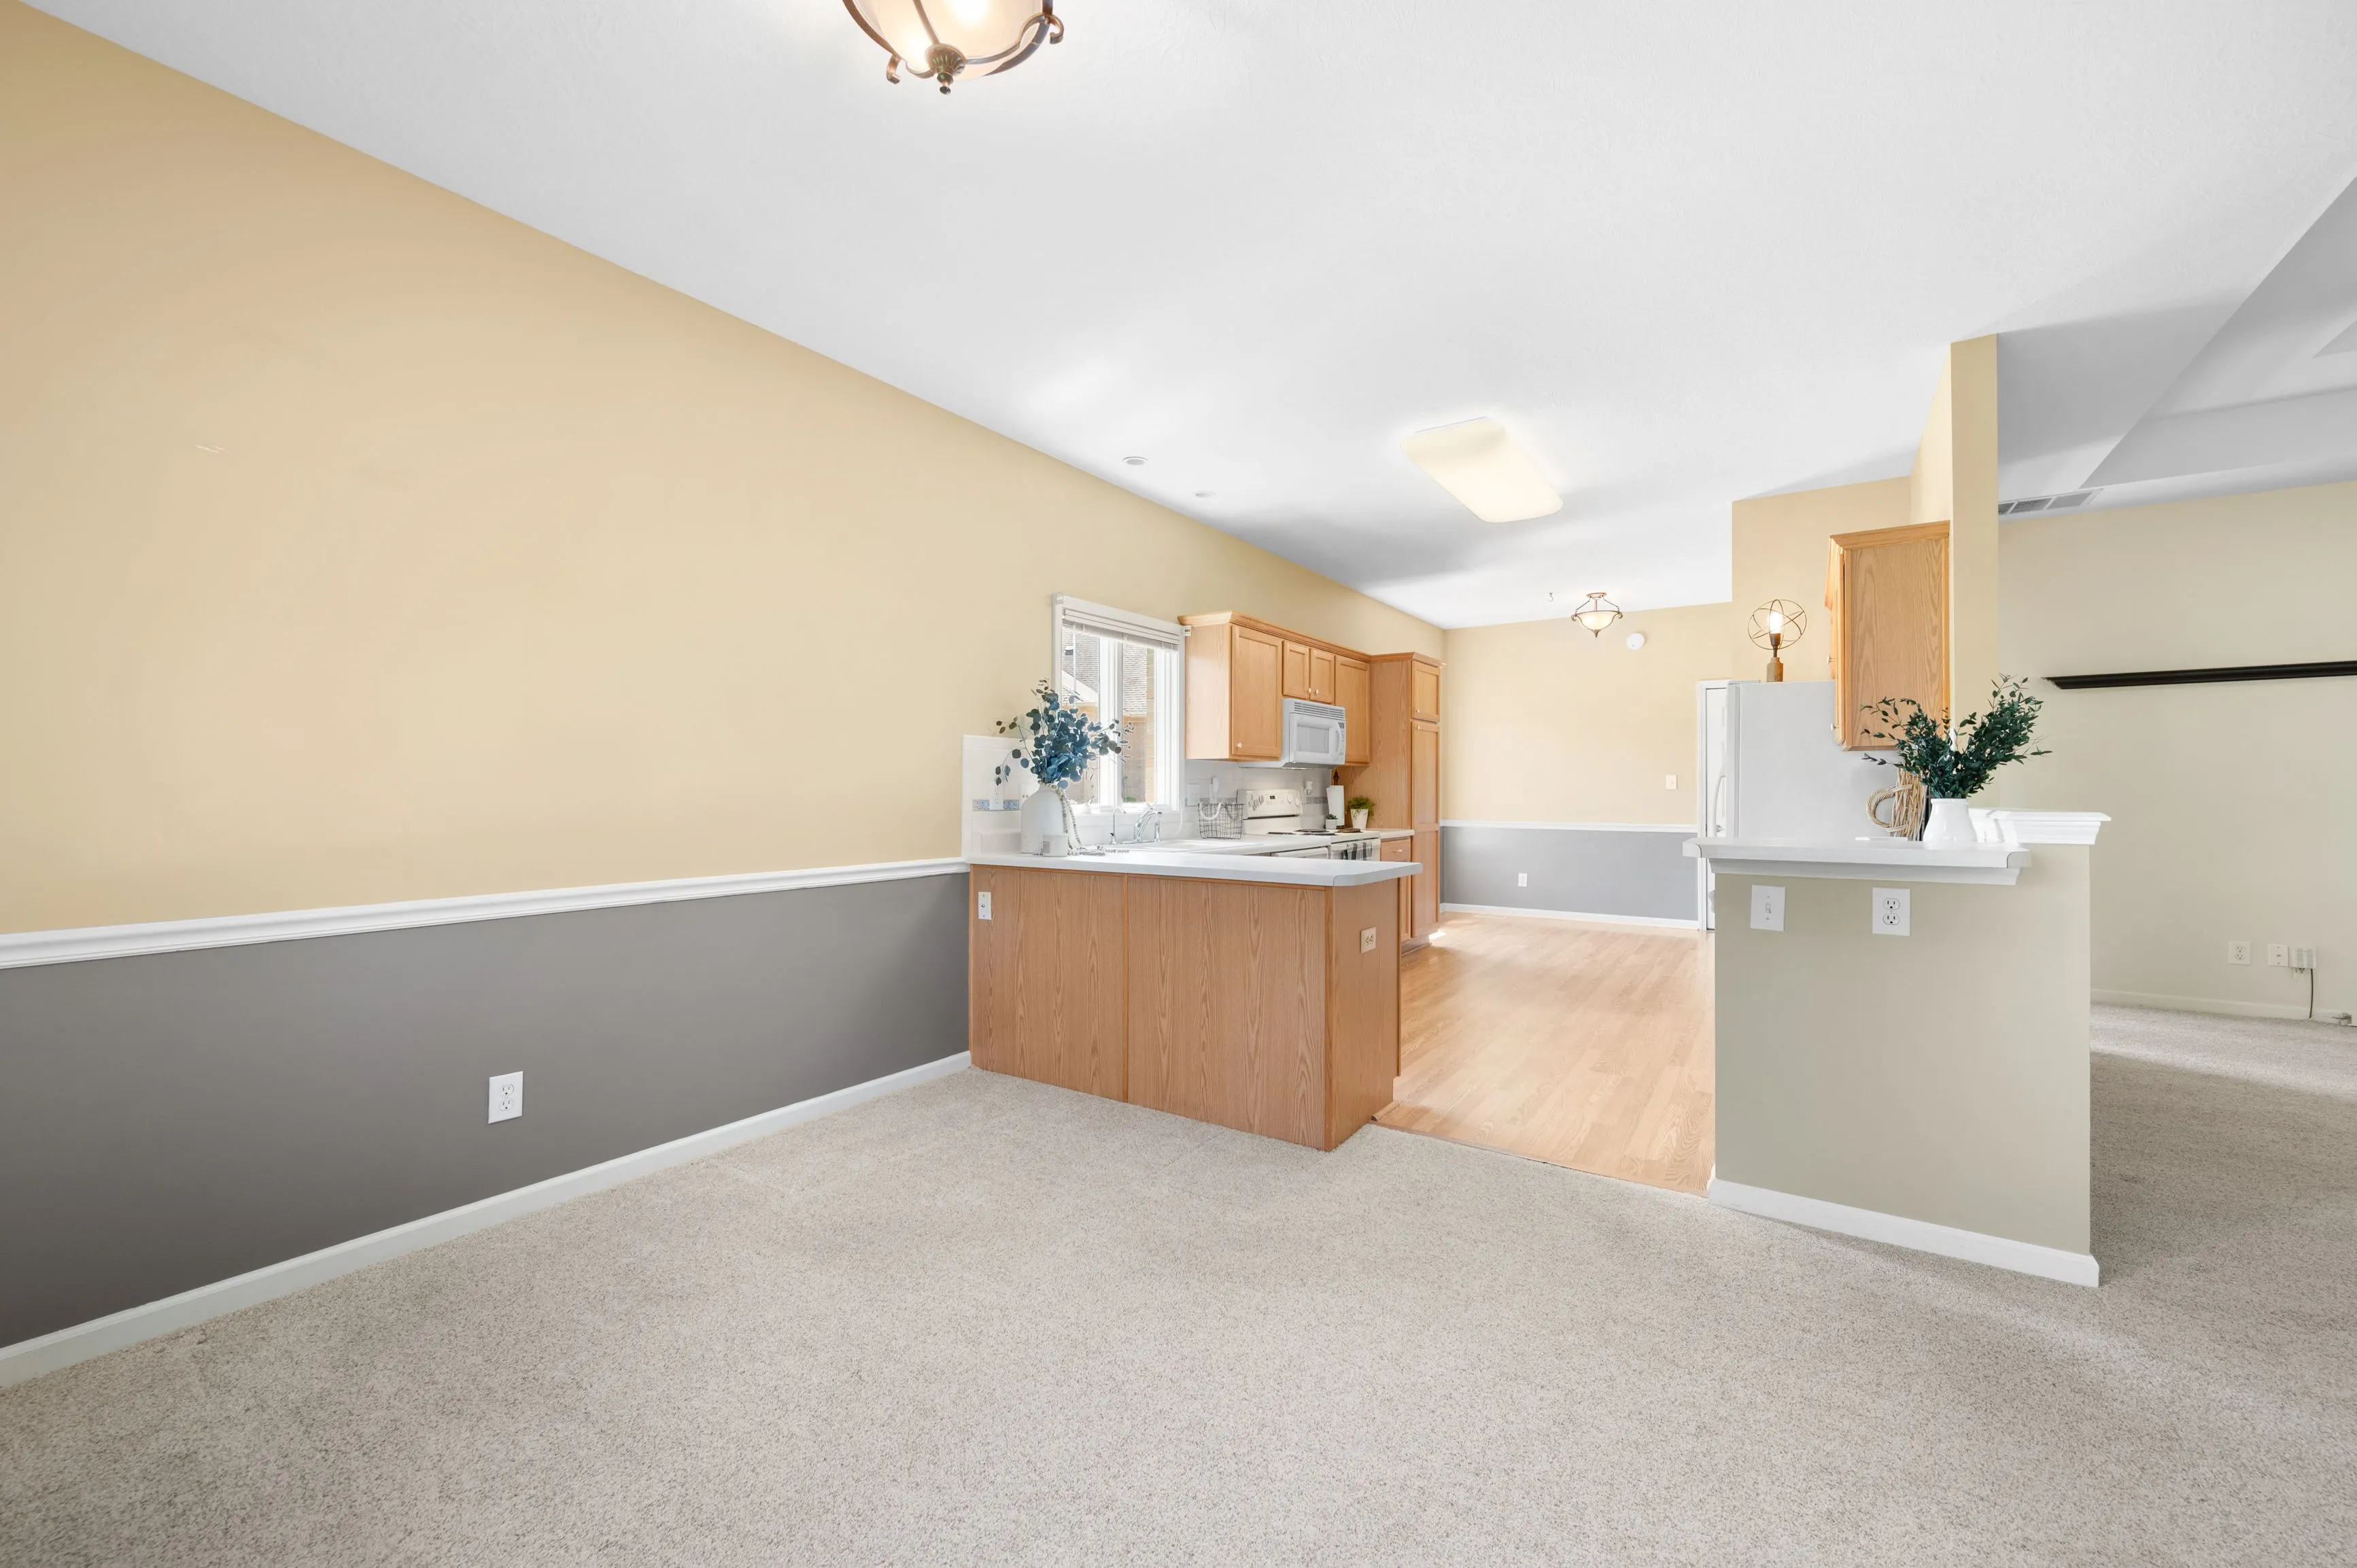 Spacious and brightly lit empty room with combined kitchen and dining area, featuring wooden cabinets, carpeted and hardwood flooring, and neutral color scheme.